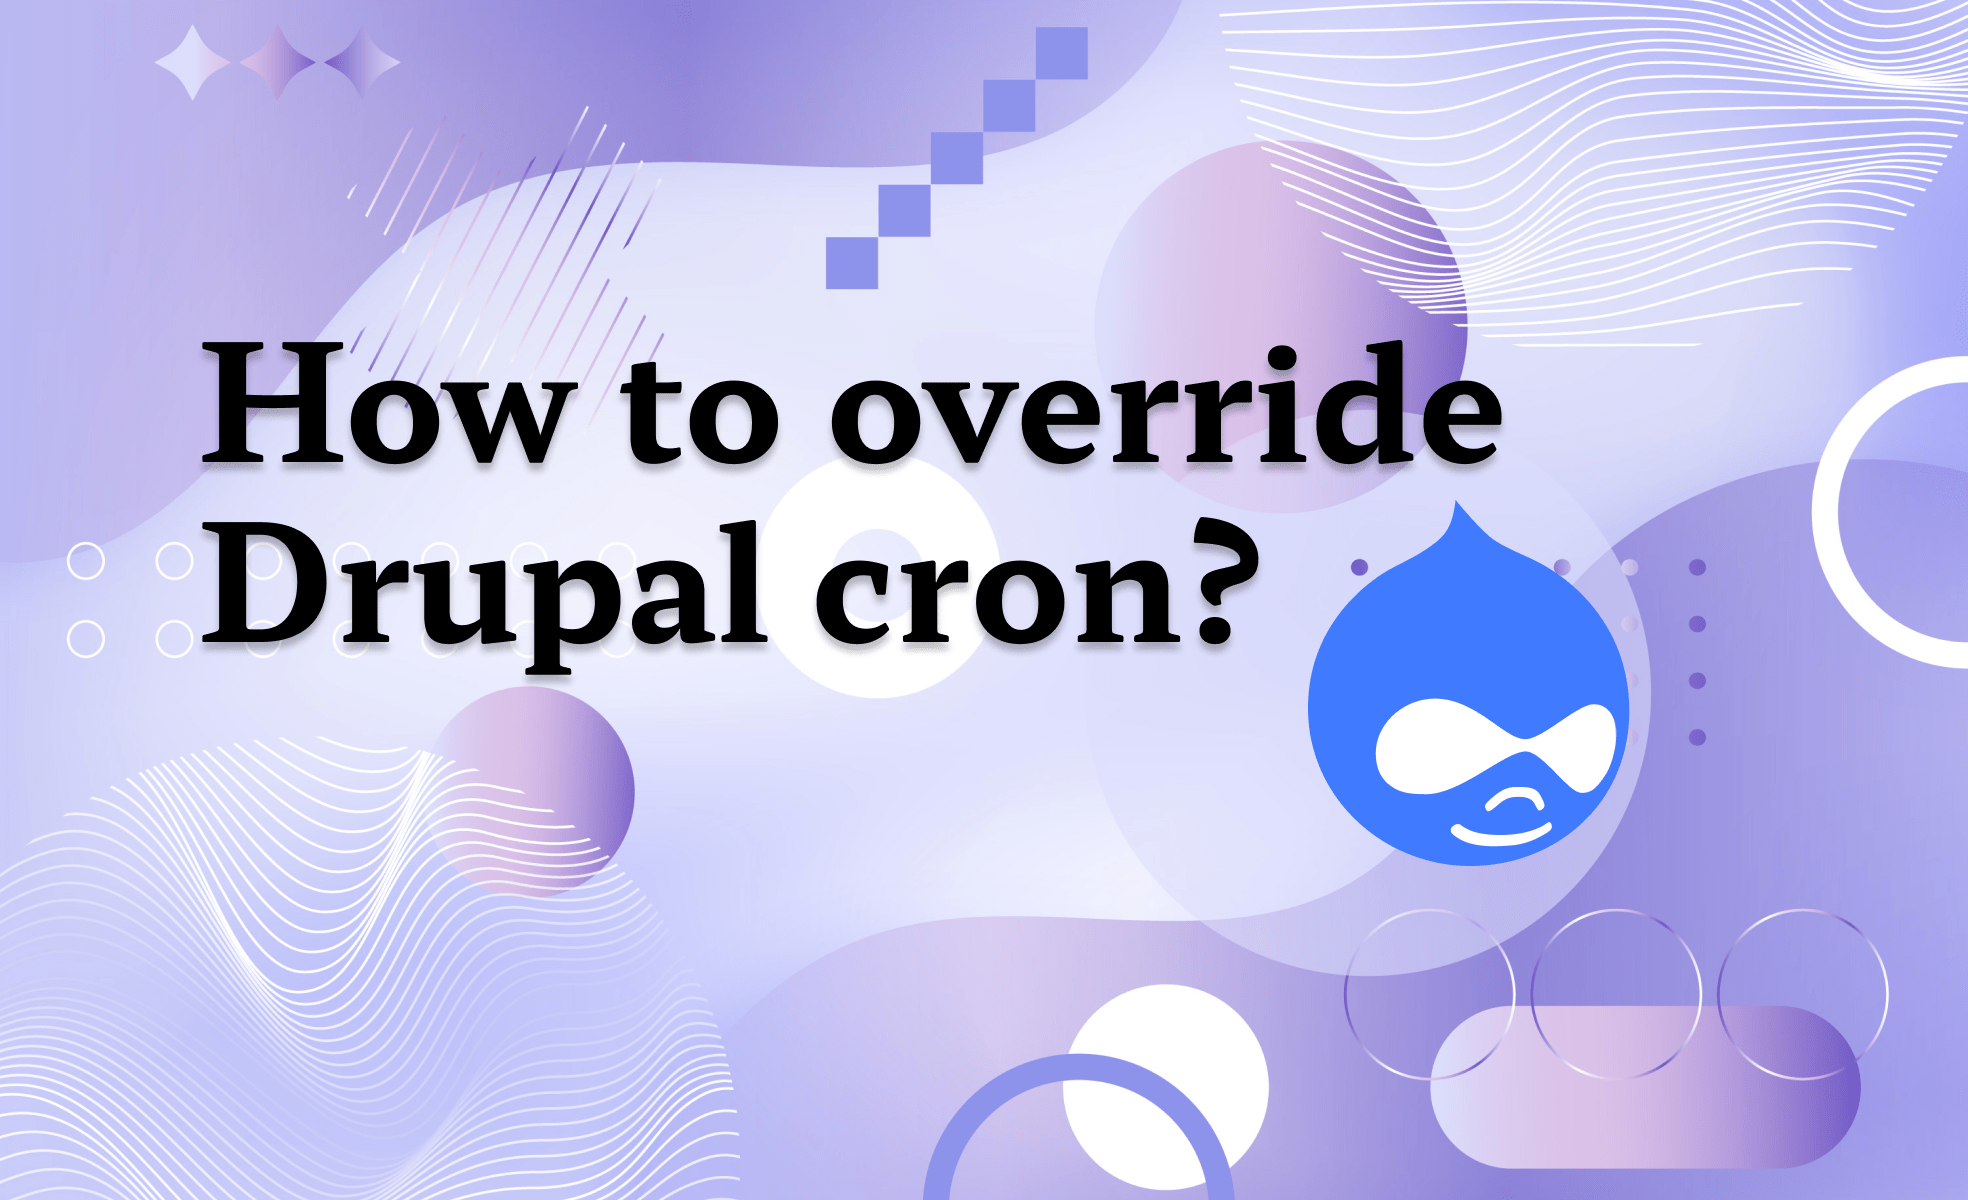 How to override Drupal cron?